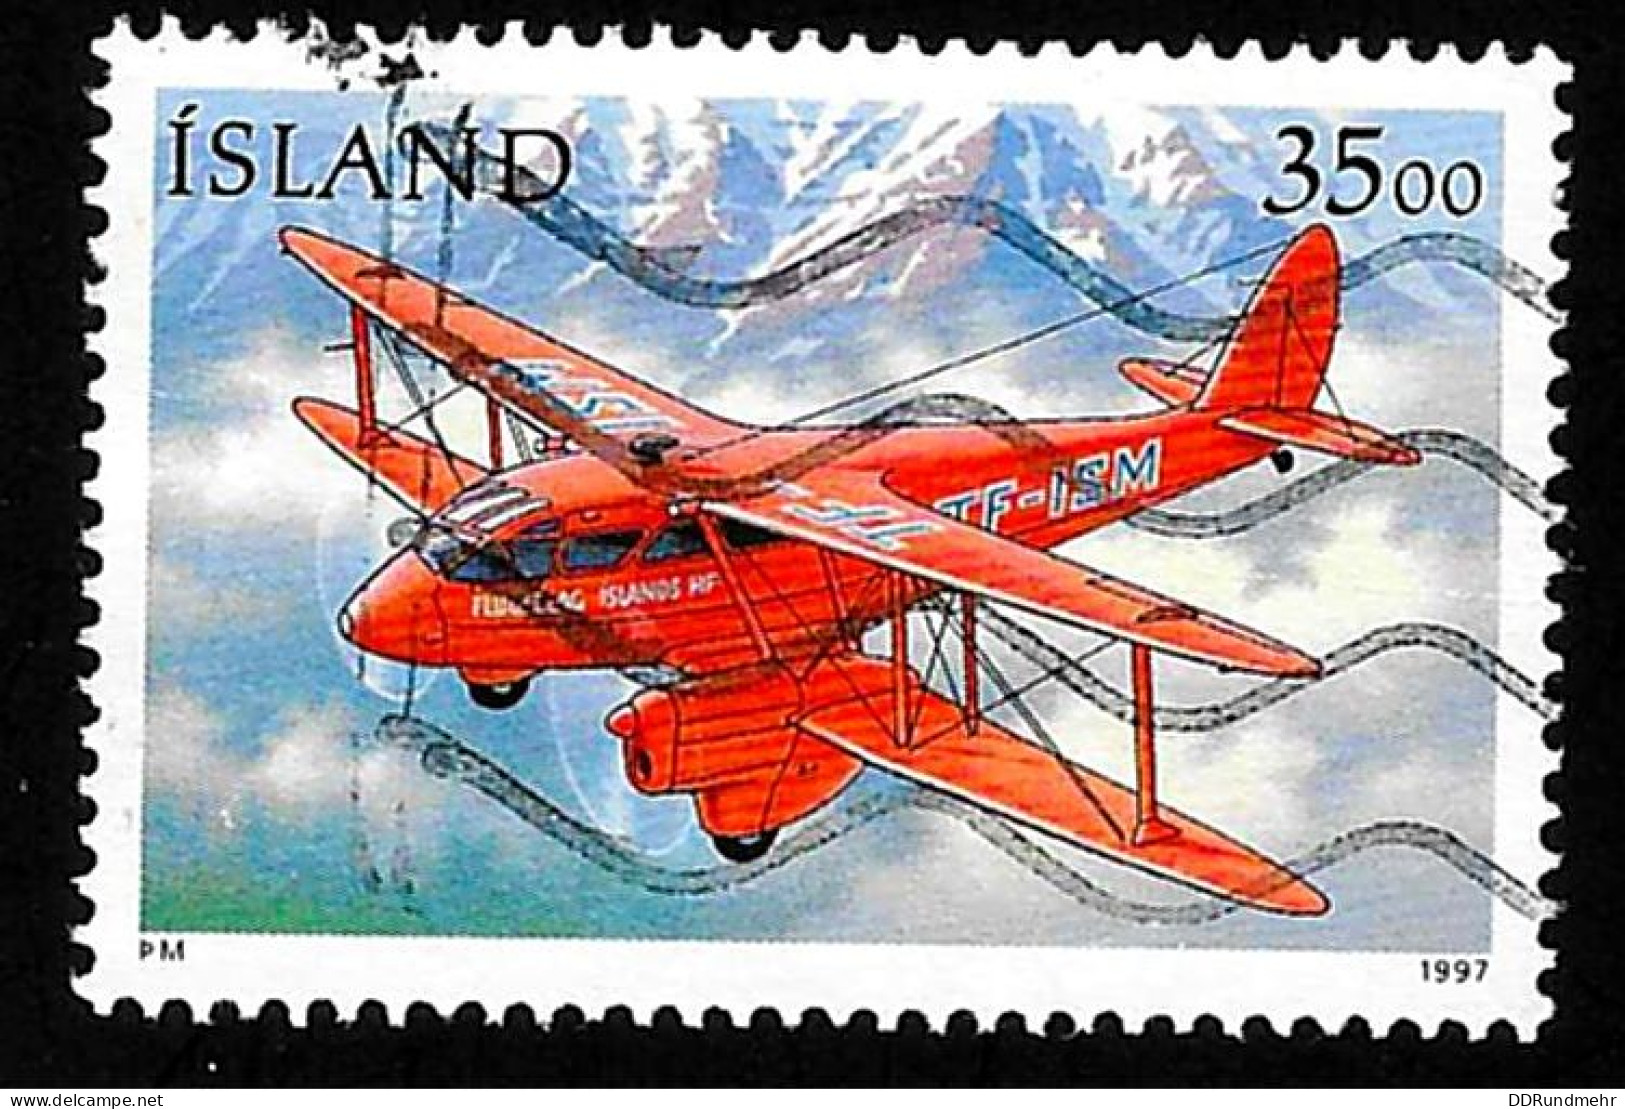 1997 Postal Aircrafts  Michel IS 866 Stamp Number IS 838 Stanley Gibbons IS 879 Used - Gebruikt